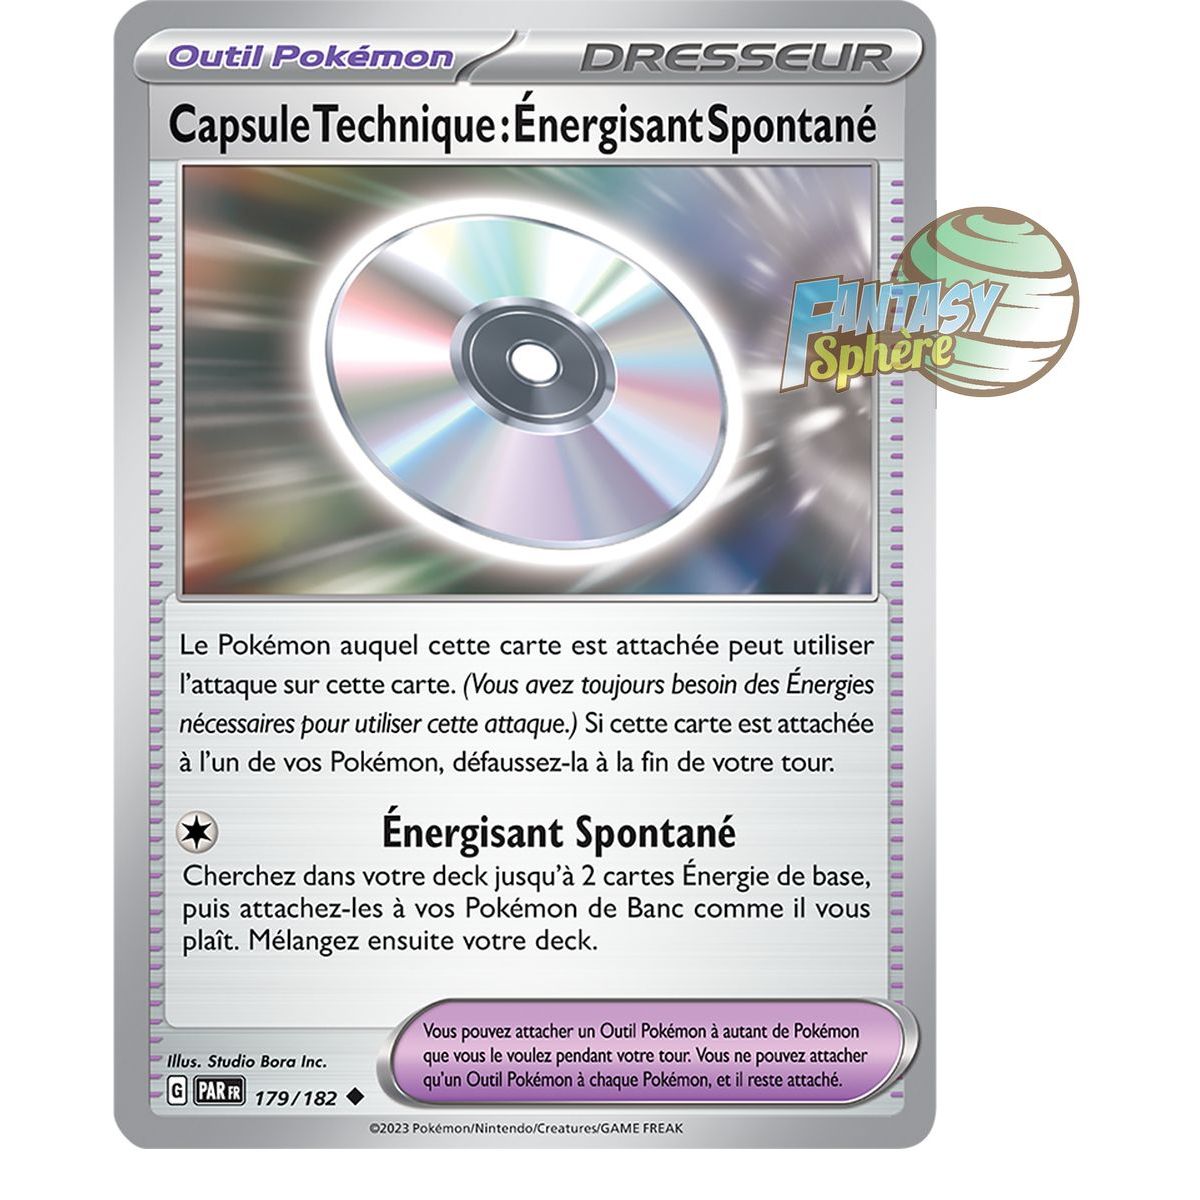 Technical Capsule: Spontaneous Energizer - Uncommon 179/182 - Scarlet and Violet Faille Paradox